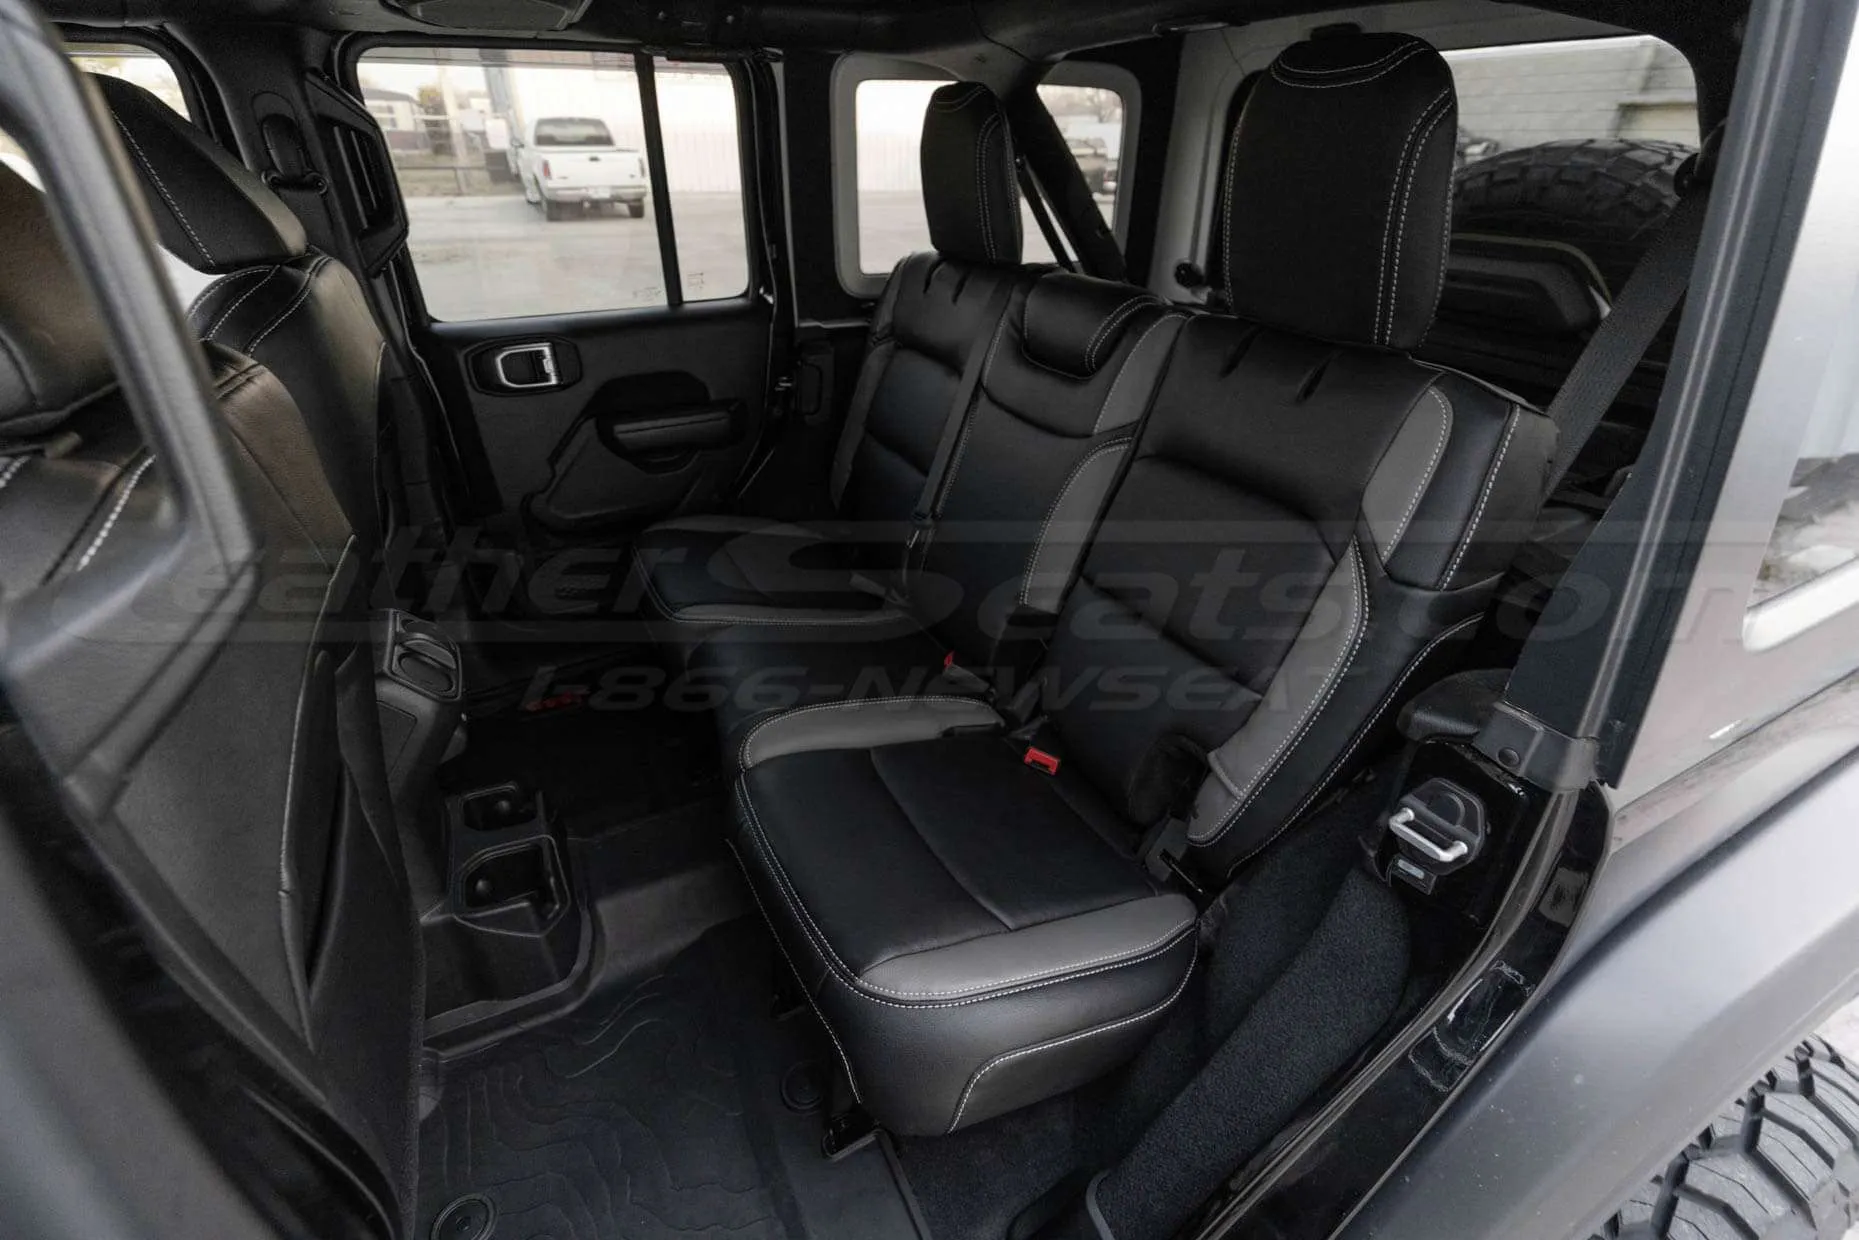 Jeep Wrangler JL Installed Leather seats - Rear seats from driver's side